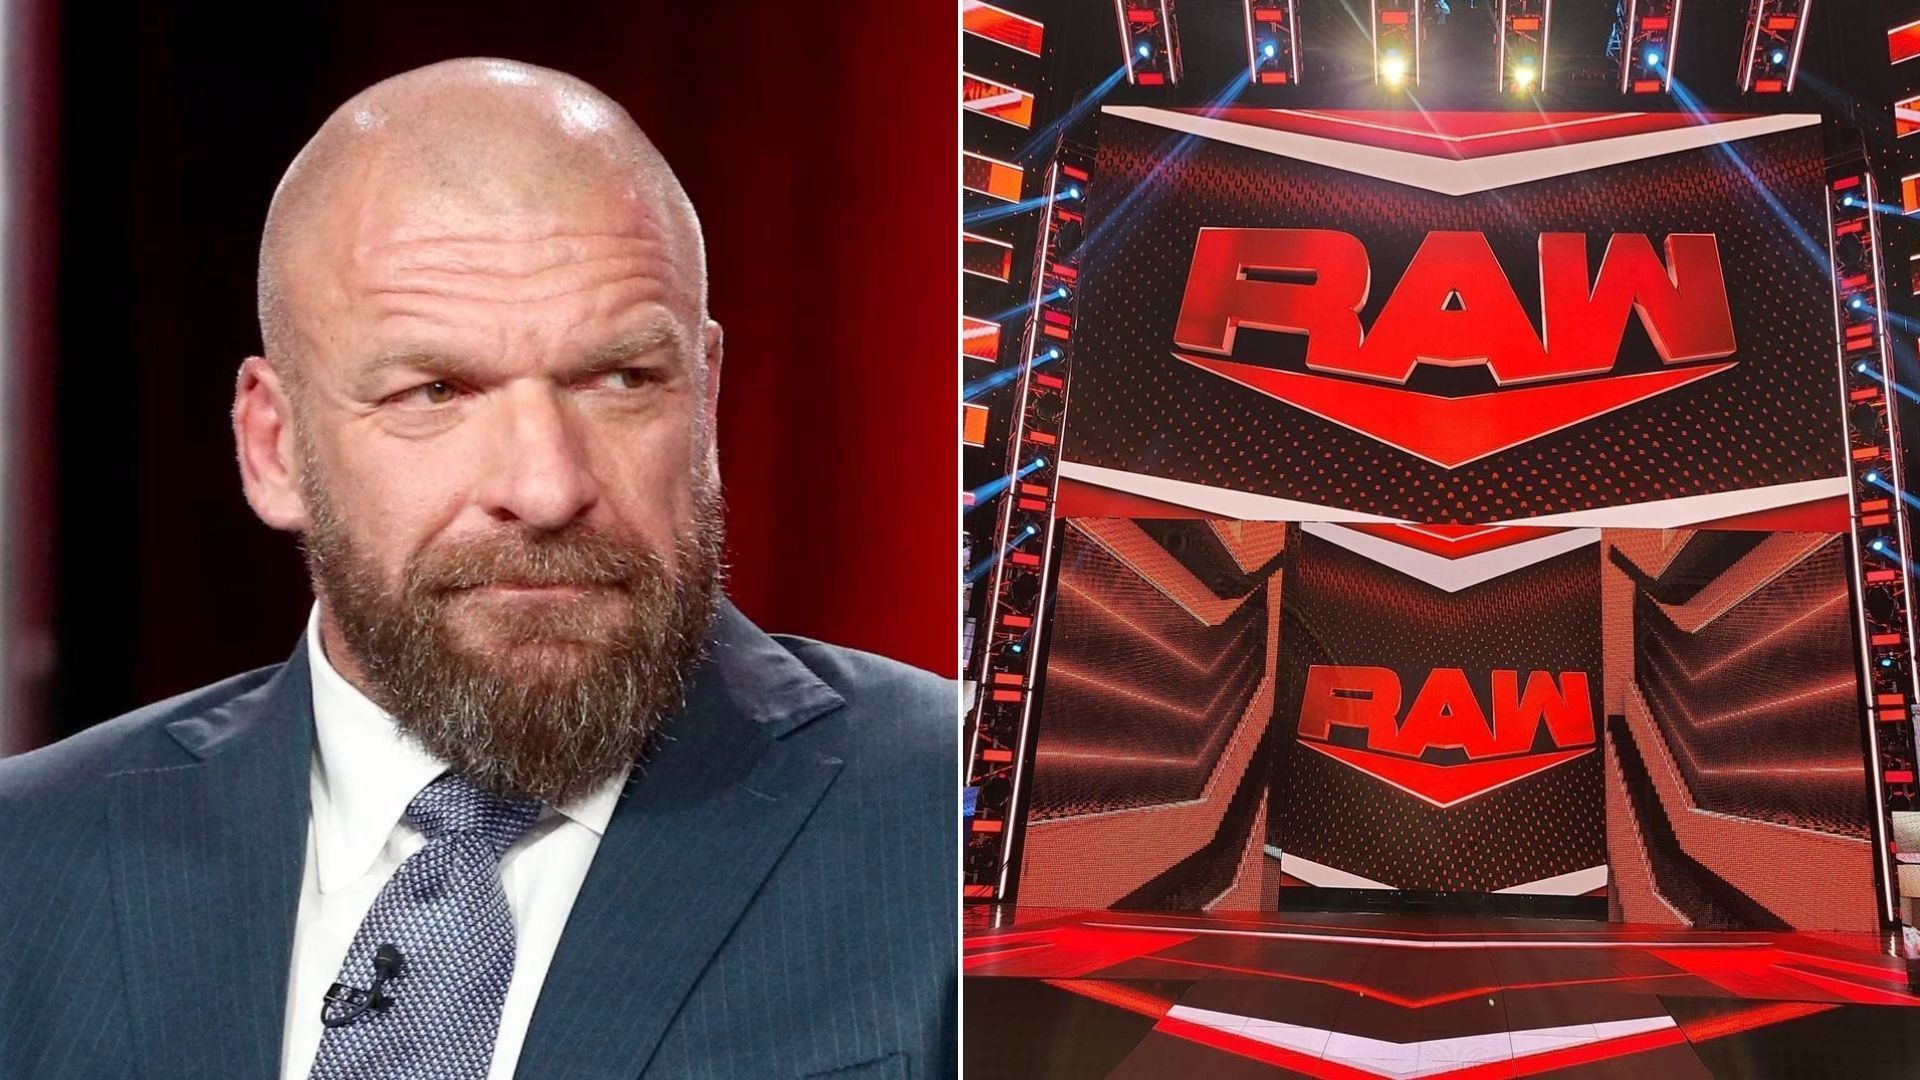 Triple H has now taken over WWE creative after Vince McMahon&#039;s retirement